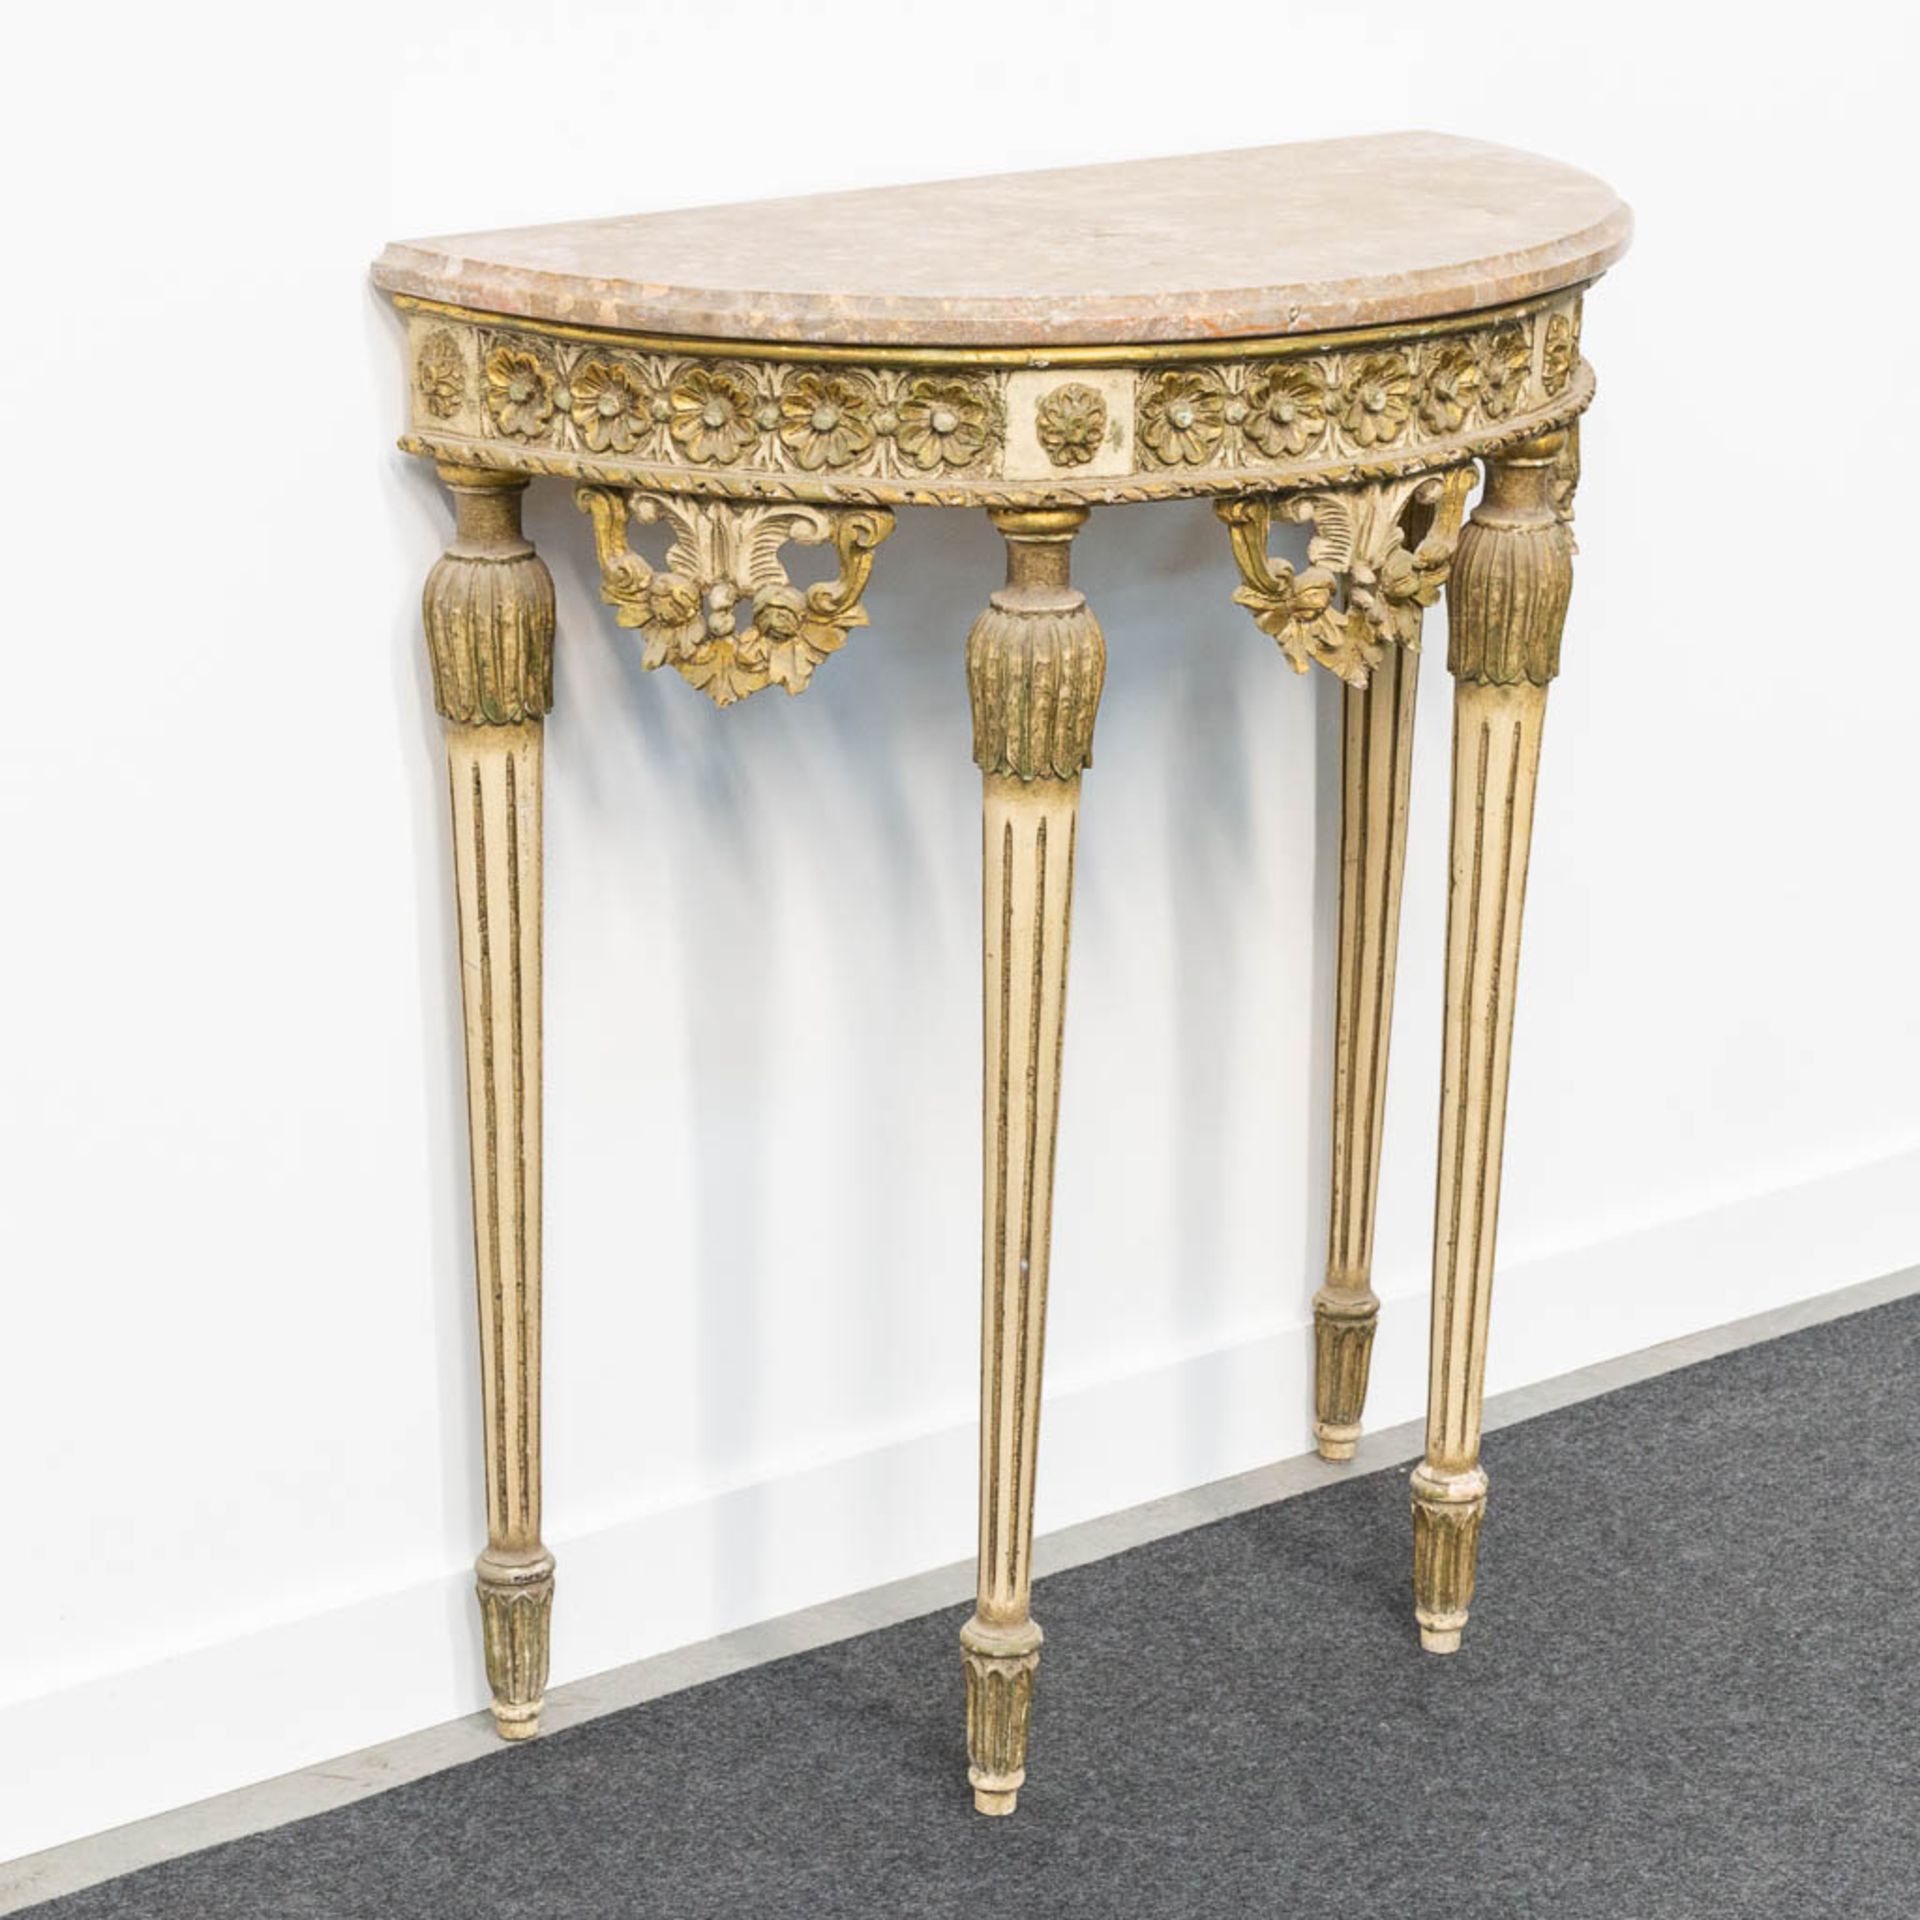 A Louis XVI style console table with marble top and sculptured wood decorations. - Image 3 of 12